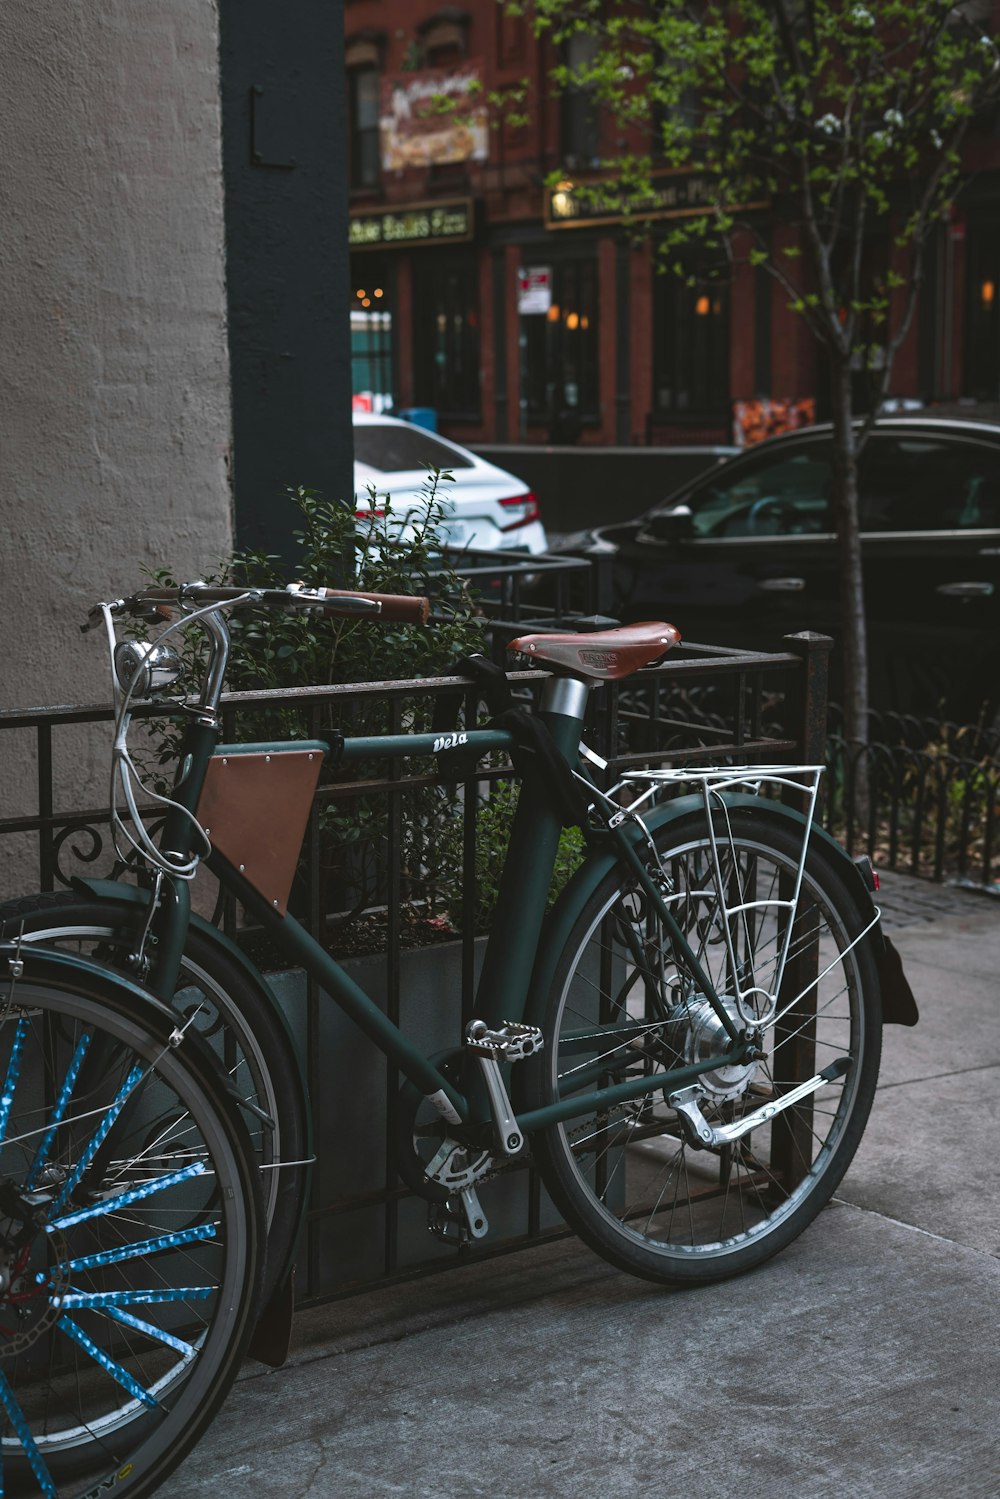 a bicycle parked on the side of the street